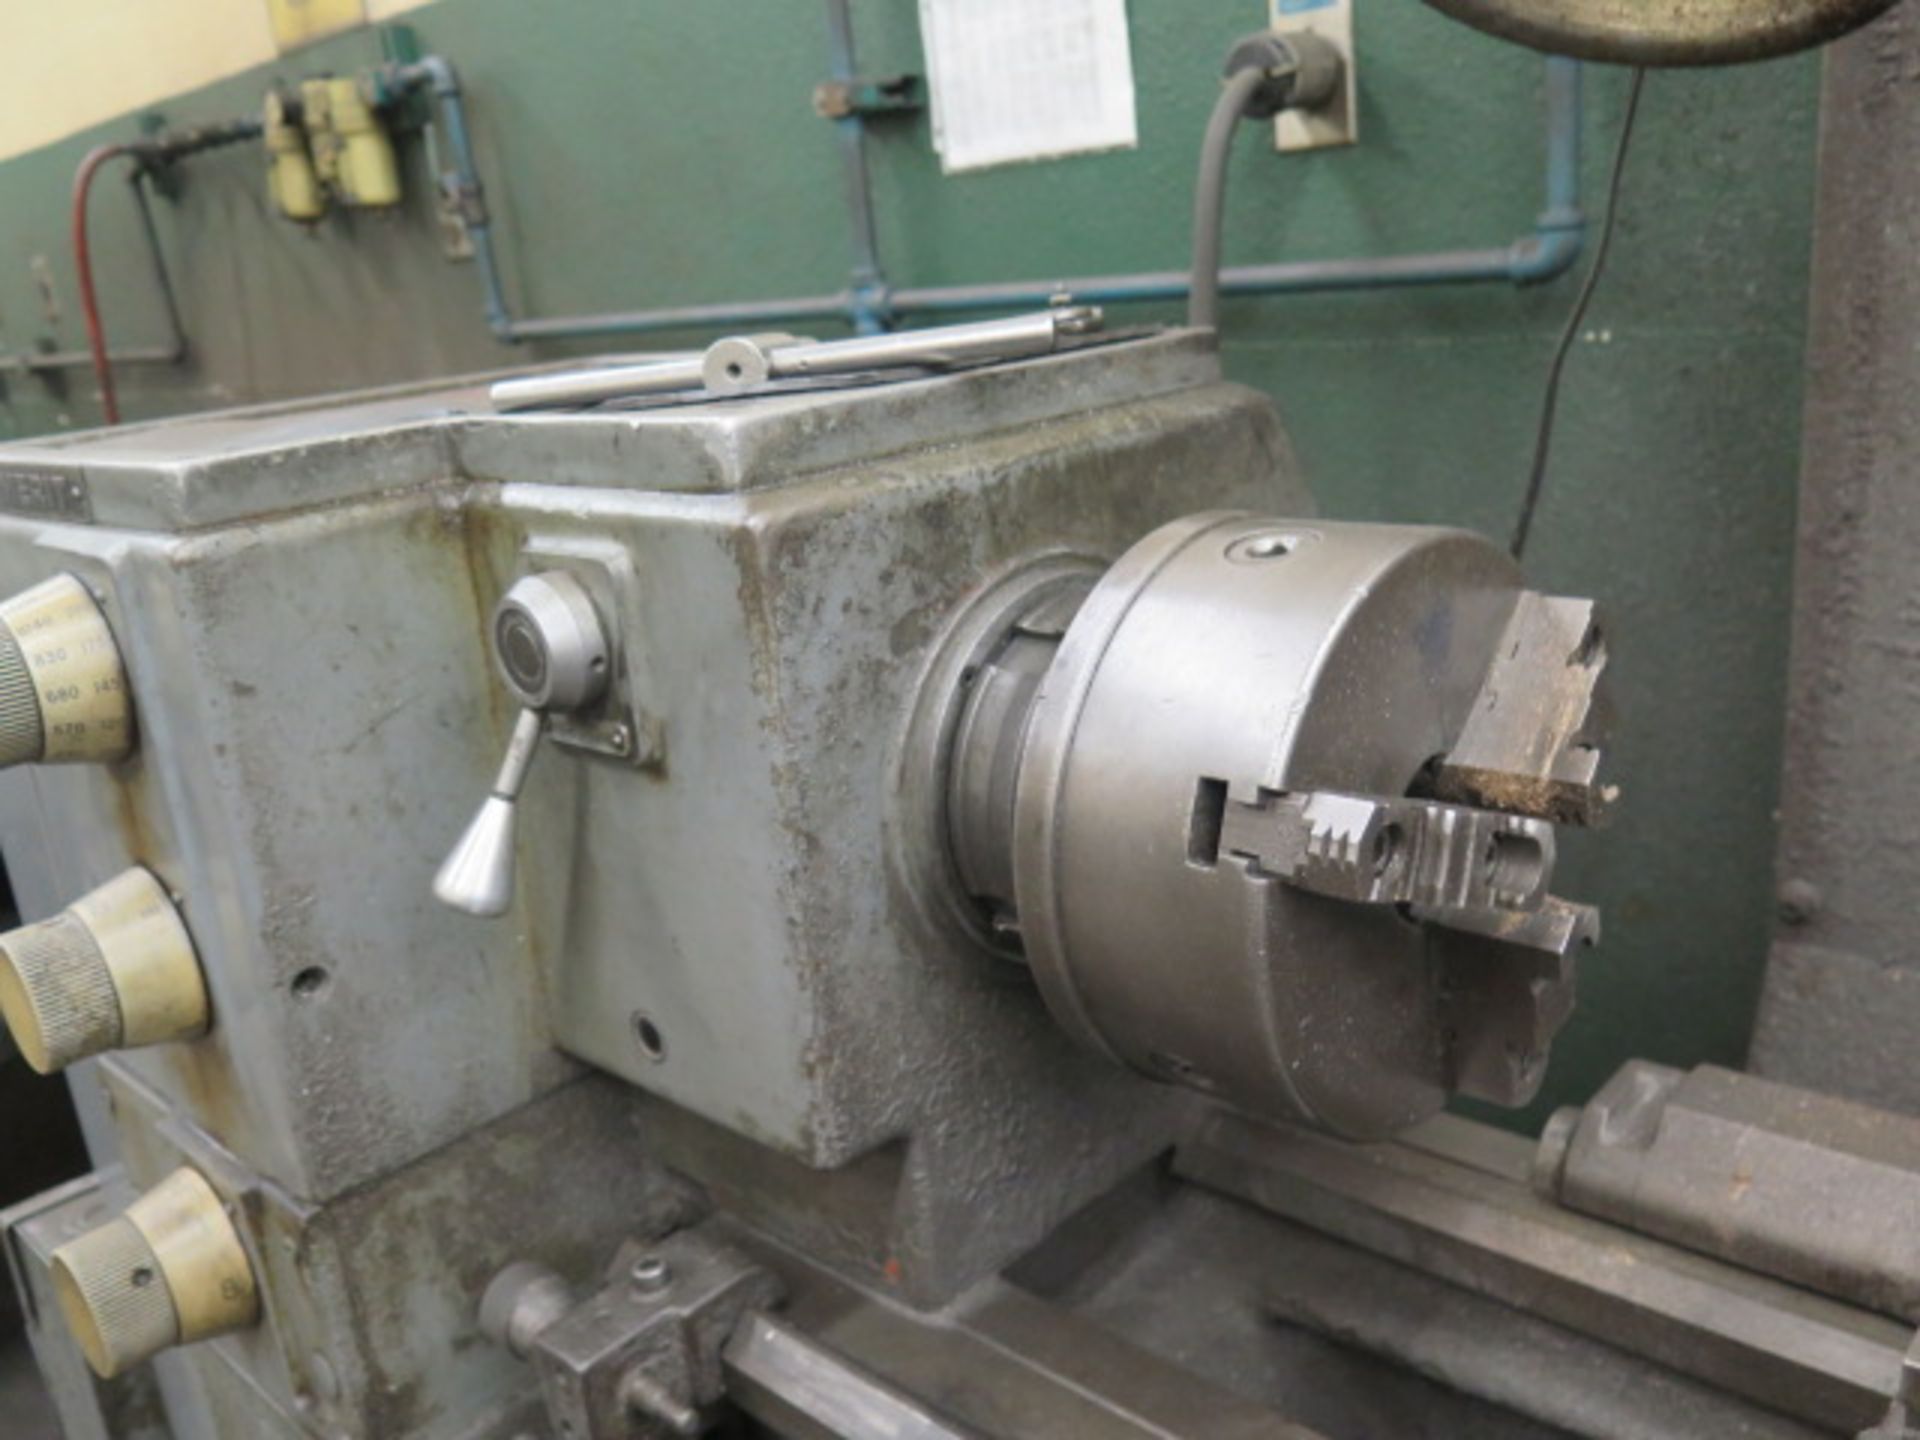 Merit 15" x 42" Lathe s/n 48752 w/ 30-1800 RPM, Inch Threading, Tailstock, Steady Rest, SOLD AS IS - Image 5 of 10